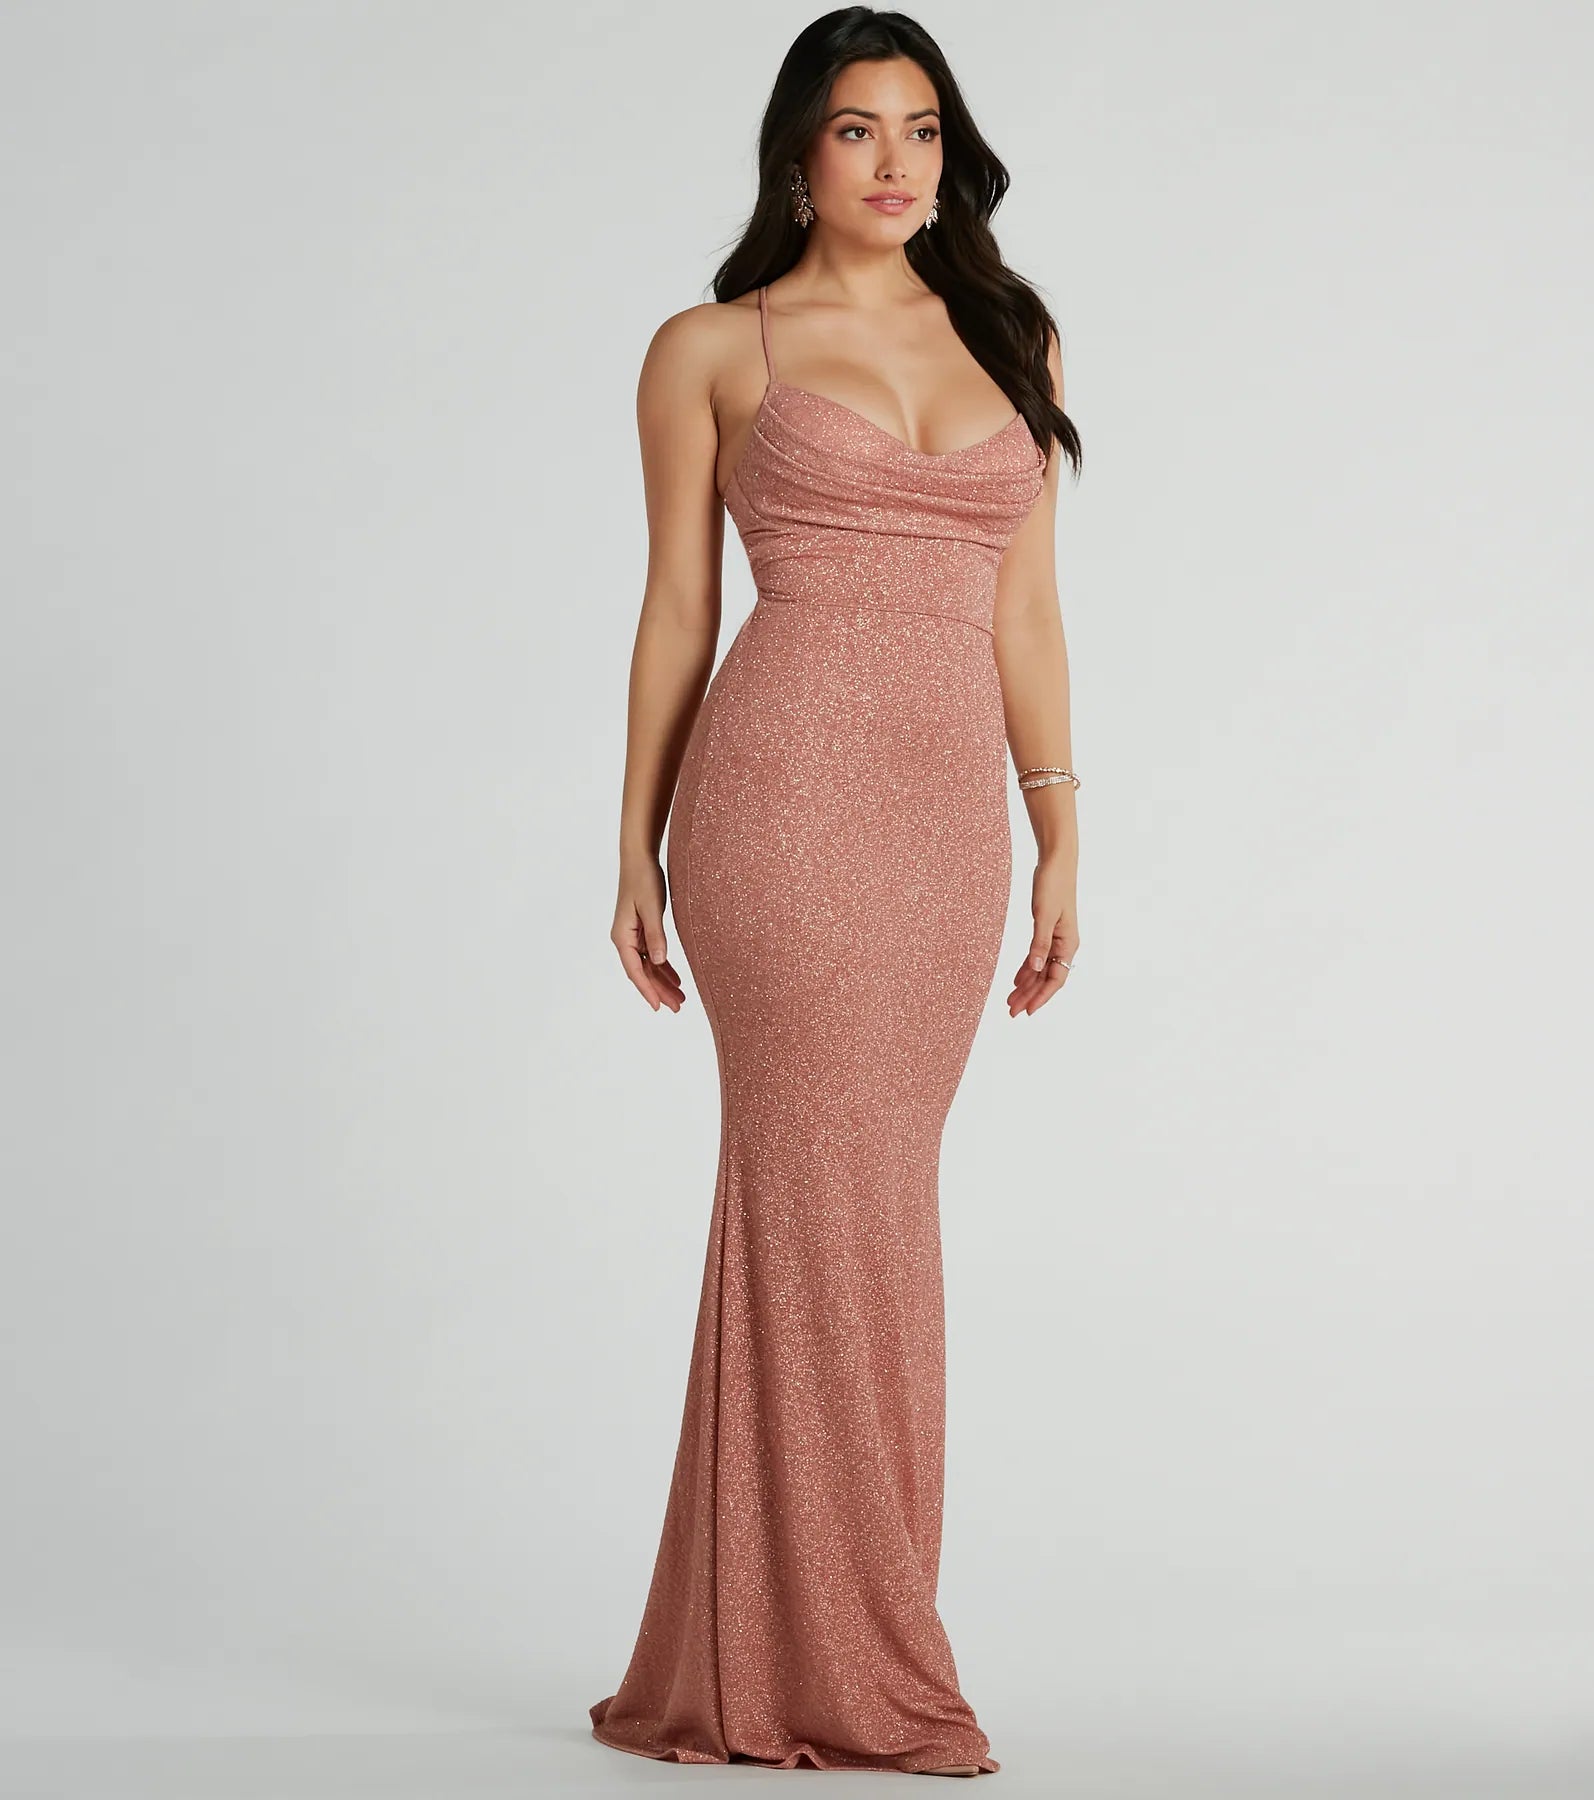 Sophisticated Floor Length Mermaid Glittering Stretchy Lace-Up Knit Cowl Neck Spaghetti Strap Prom Dress/Party Dress